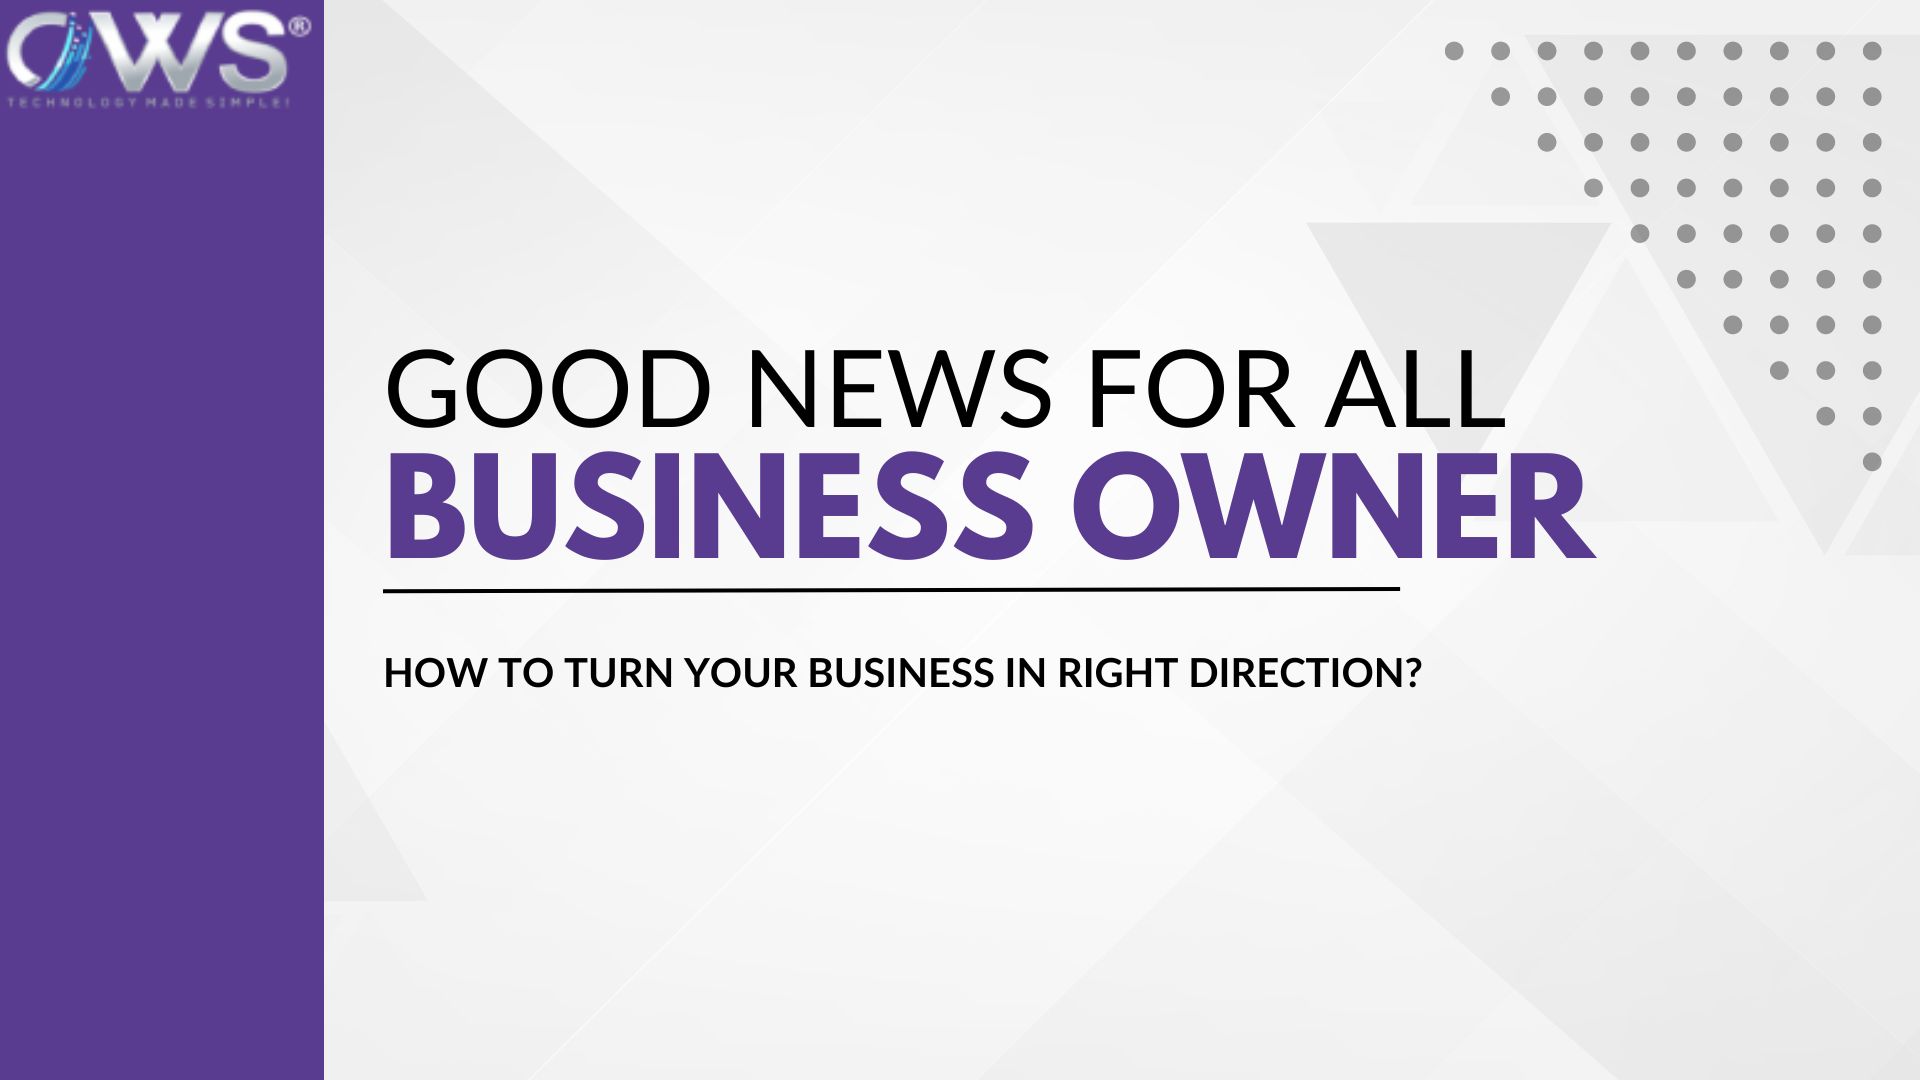 Good News of all business owner